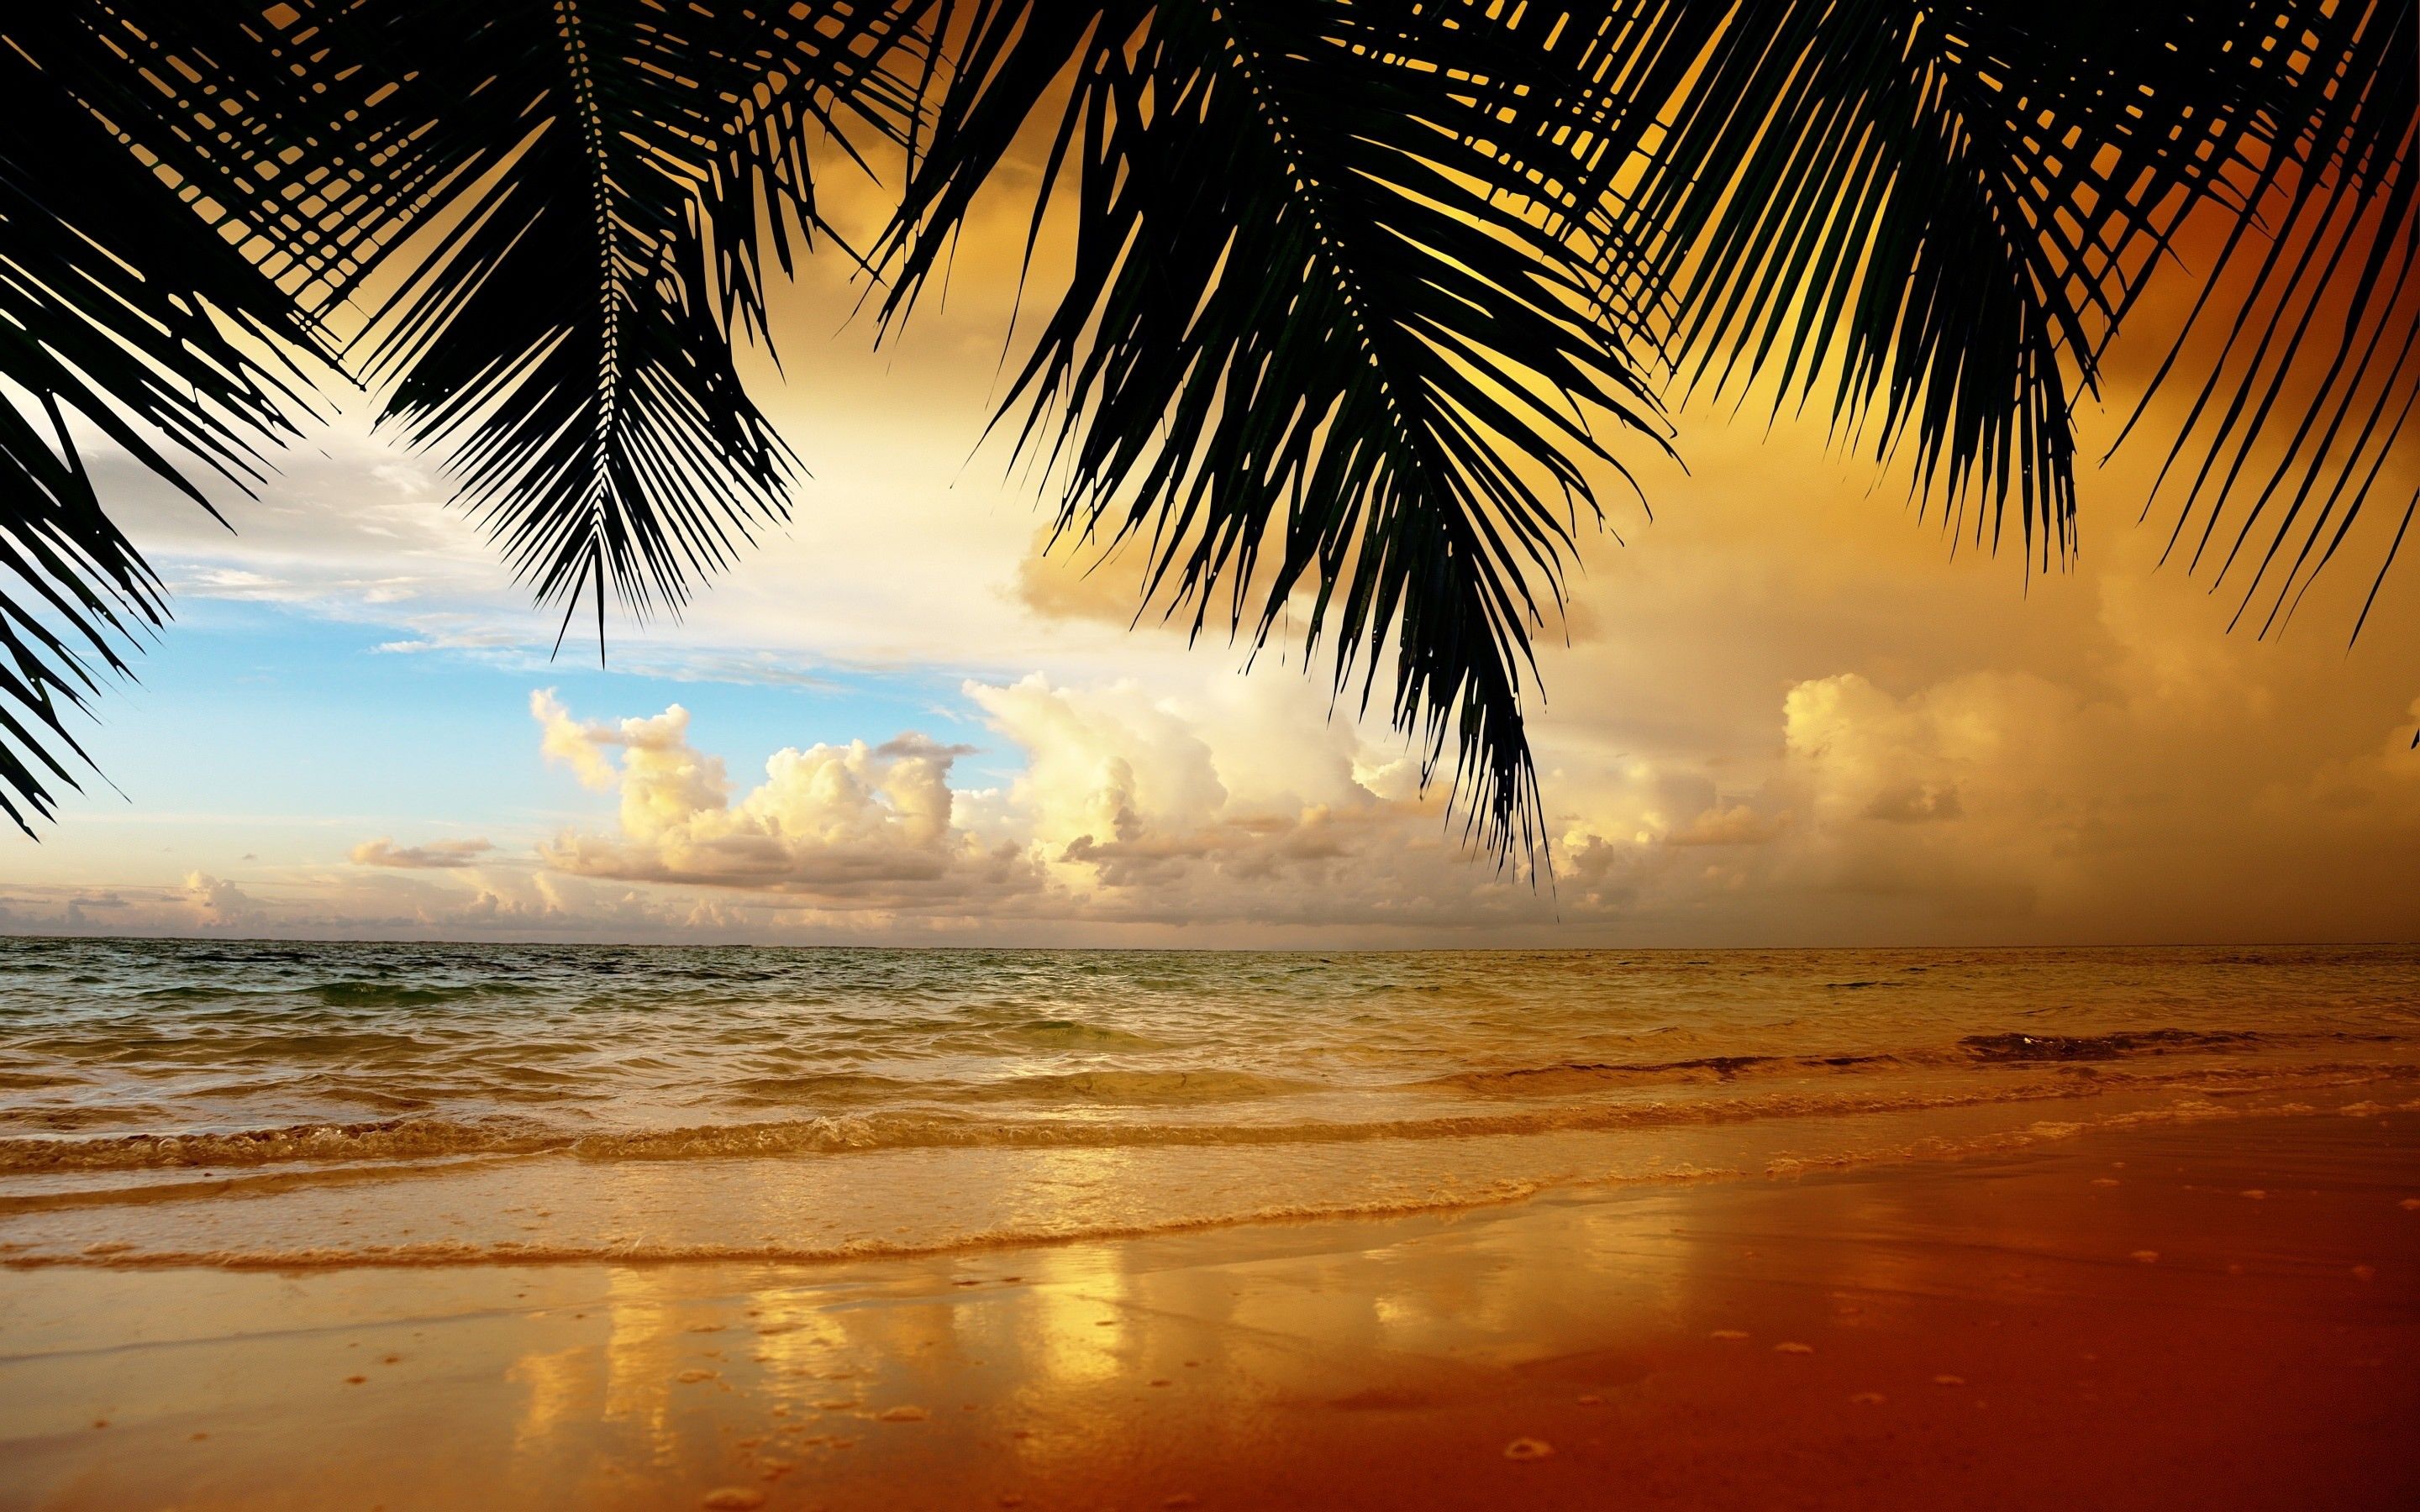 A beach with palm trees and a beautiful sunset. - Beach, landscape